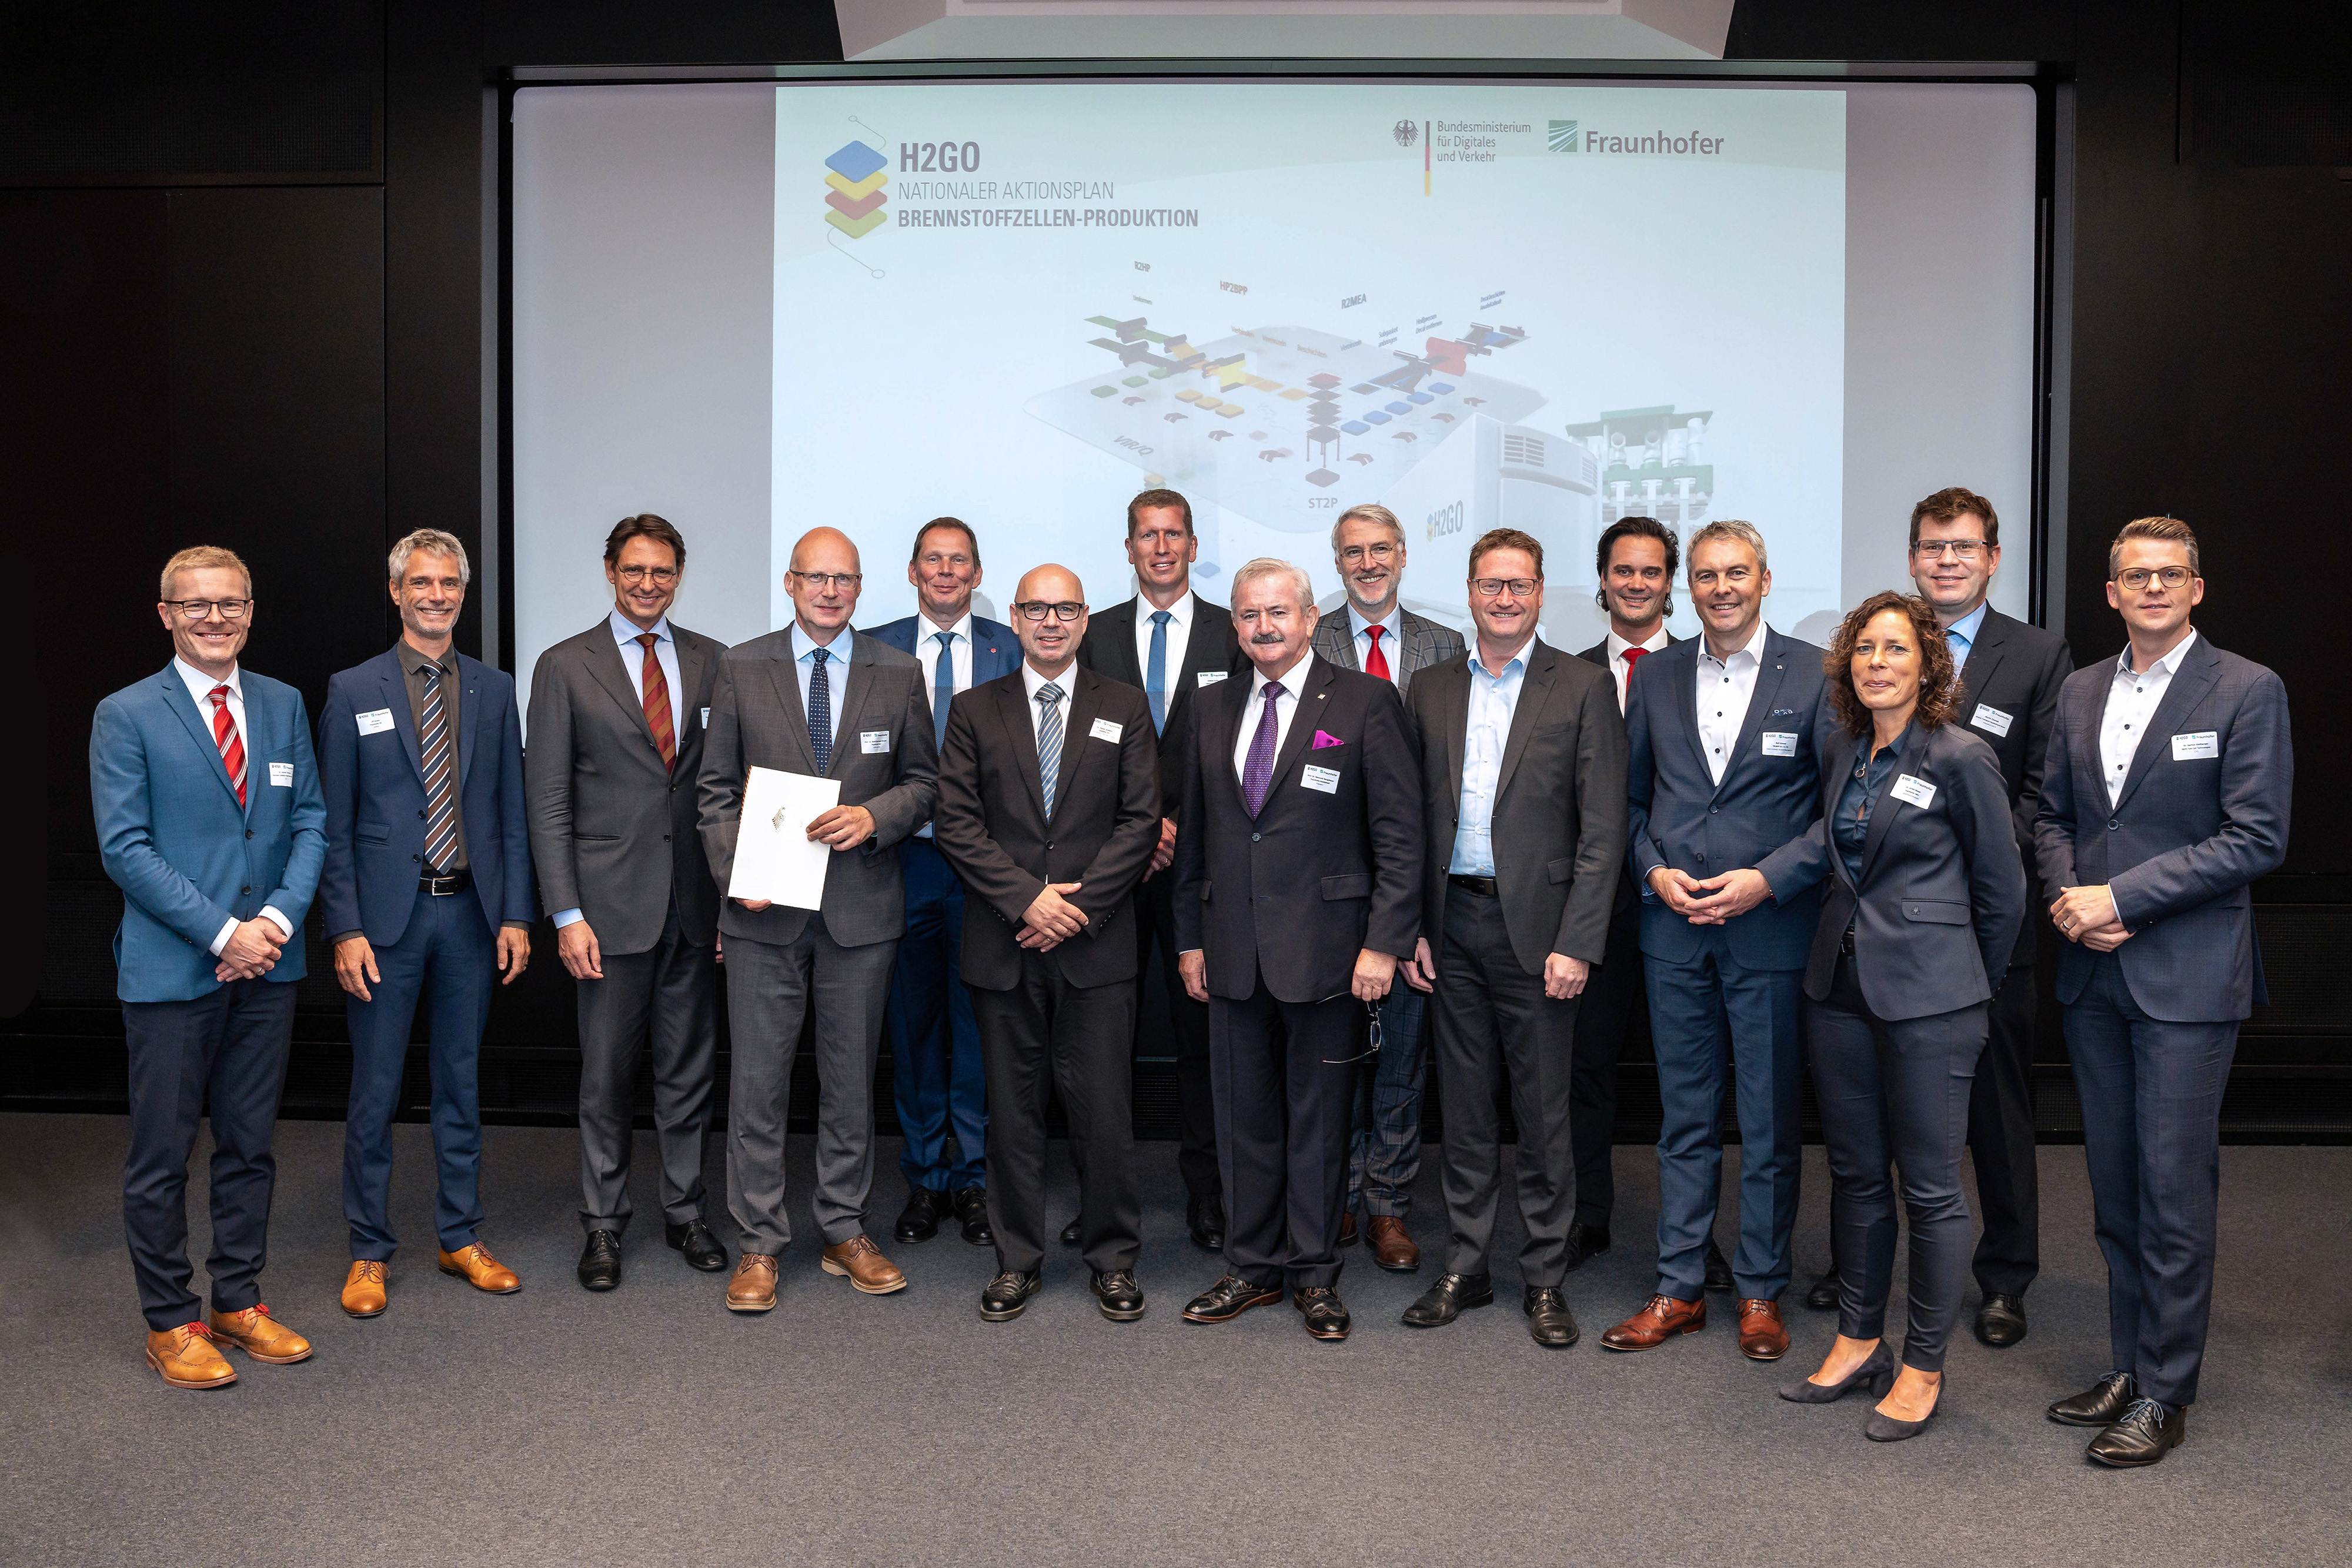 Prof. Reimund Neugebauer, President of the Fraunhofer-Gesellschaft and Prof. Welf-Guntram Drossel, Director of Fraunhofer IWU (with certificate), with representatives of industry (Alstom, Aumann, Capgemini, Schaeffler, Trumpf, EKPO) after the funding notification handover for H2GO at the Federal Ministry for Digital and Transport. Also in the picture: Kurt- Christoph von Knobelsdorff (Managing Director of NOW GmbH), Christoph Baum (Managing Director Fraunhofer IPT), Ulf Groos (Head of Fuel Cell Systems at Fraunhofer ISE) and Dr. Ulrike Beyer (Head of the Hydrogen Taskforce at Fraunhofer IWU).